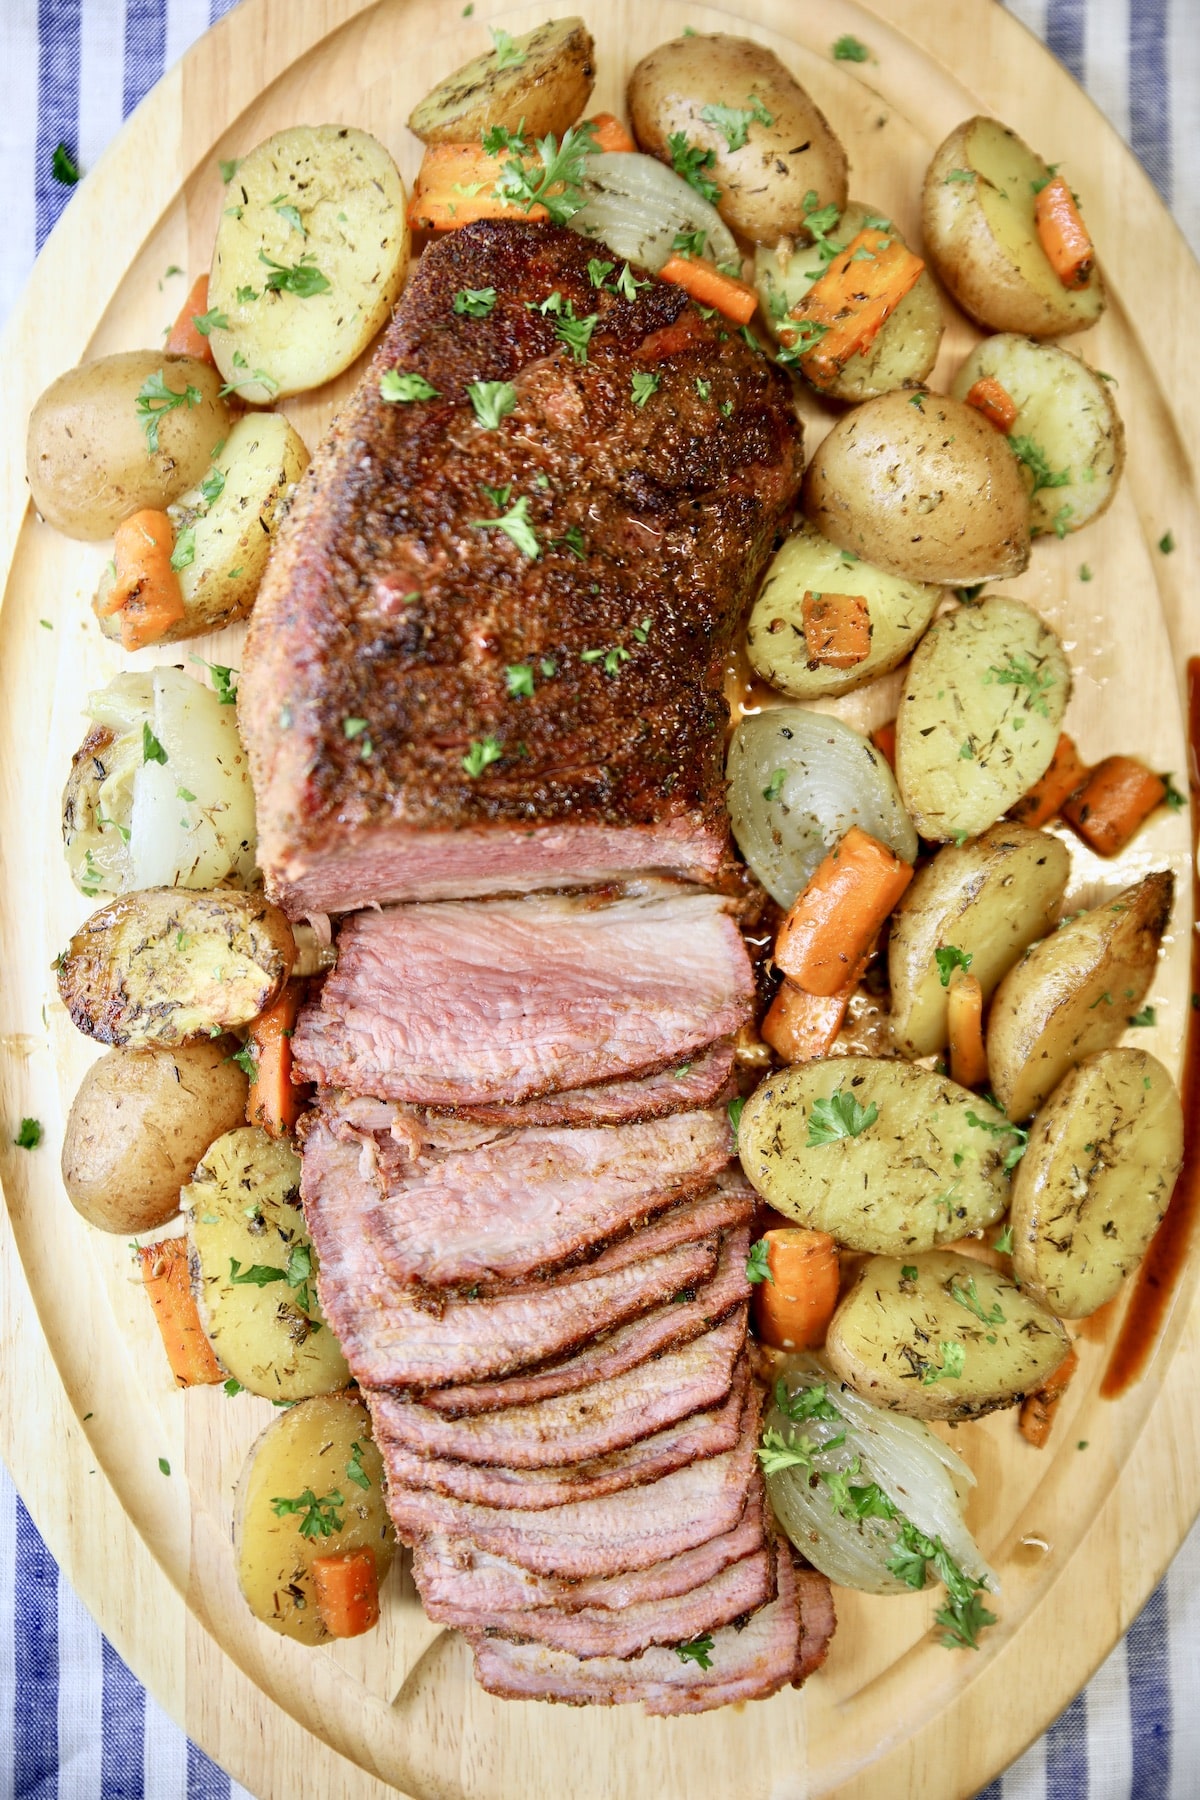 Oval cutting board with roast beef, partially sliced, roasted carrots, potatoes, onions.